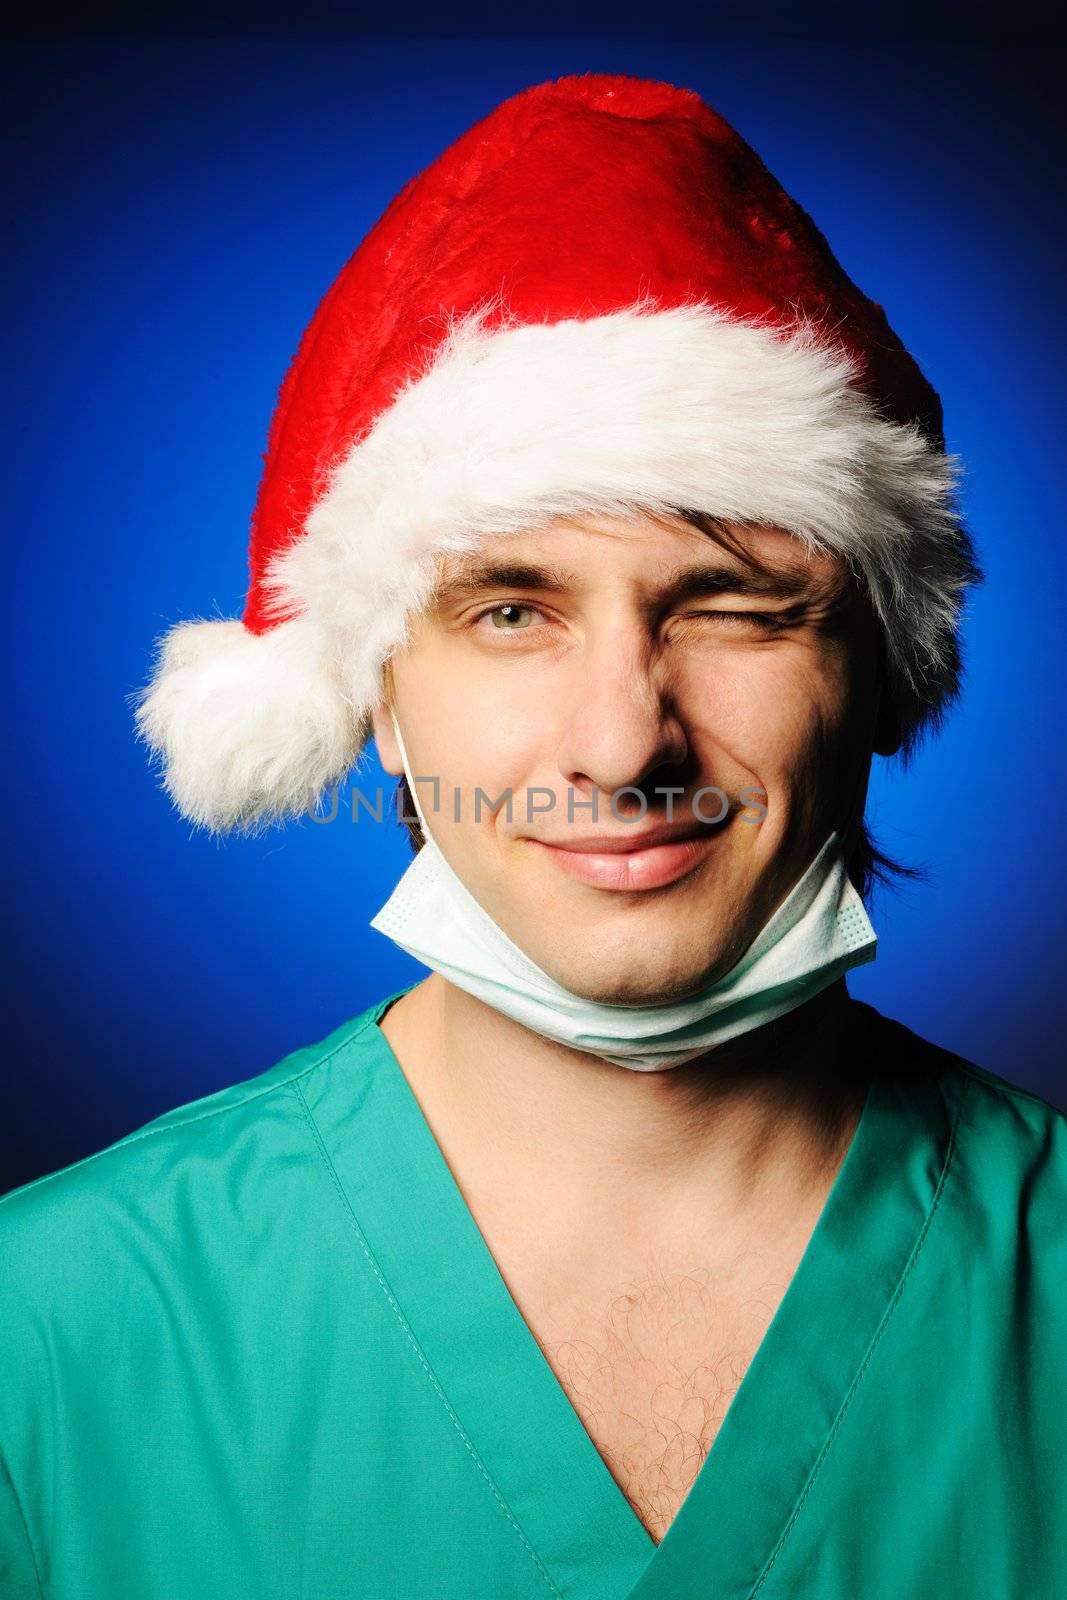 Surgeon with mask in Santa's hat smiling and winking